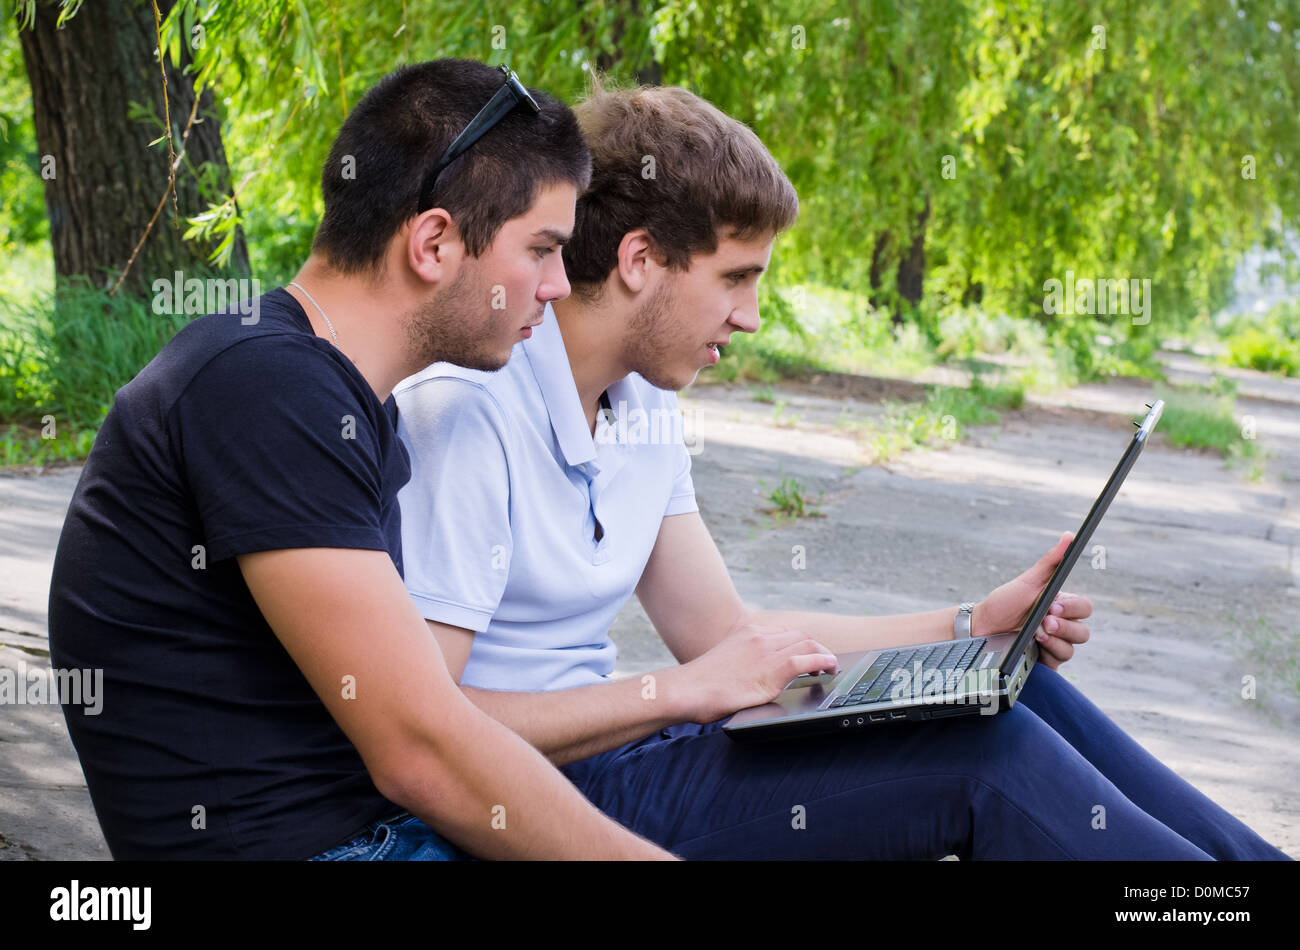 Two young men sitting on the ground outdoors under trees using a laptop together Stock Photo